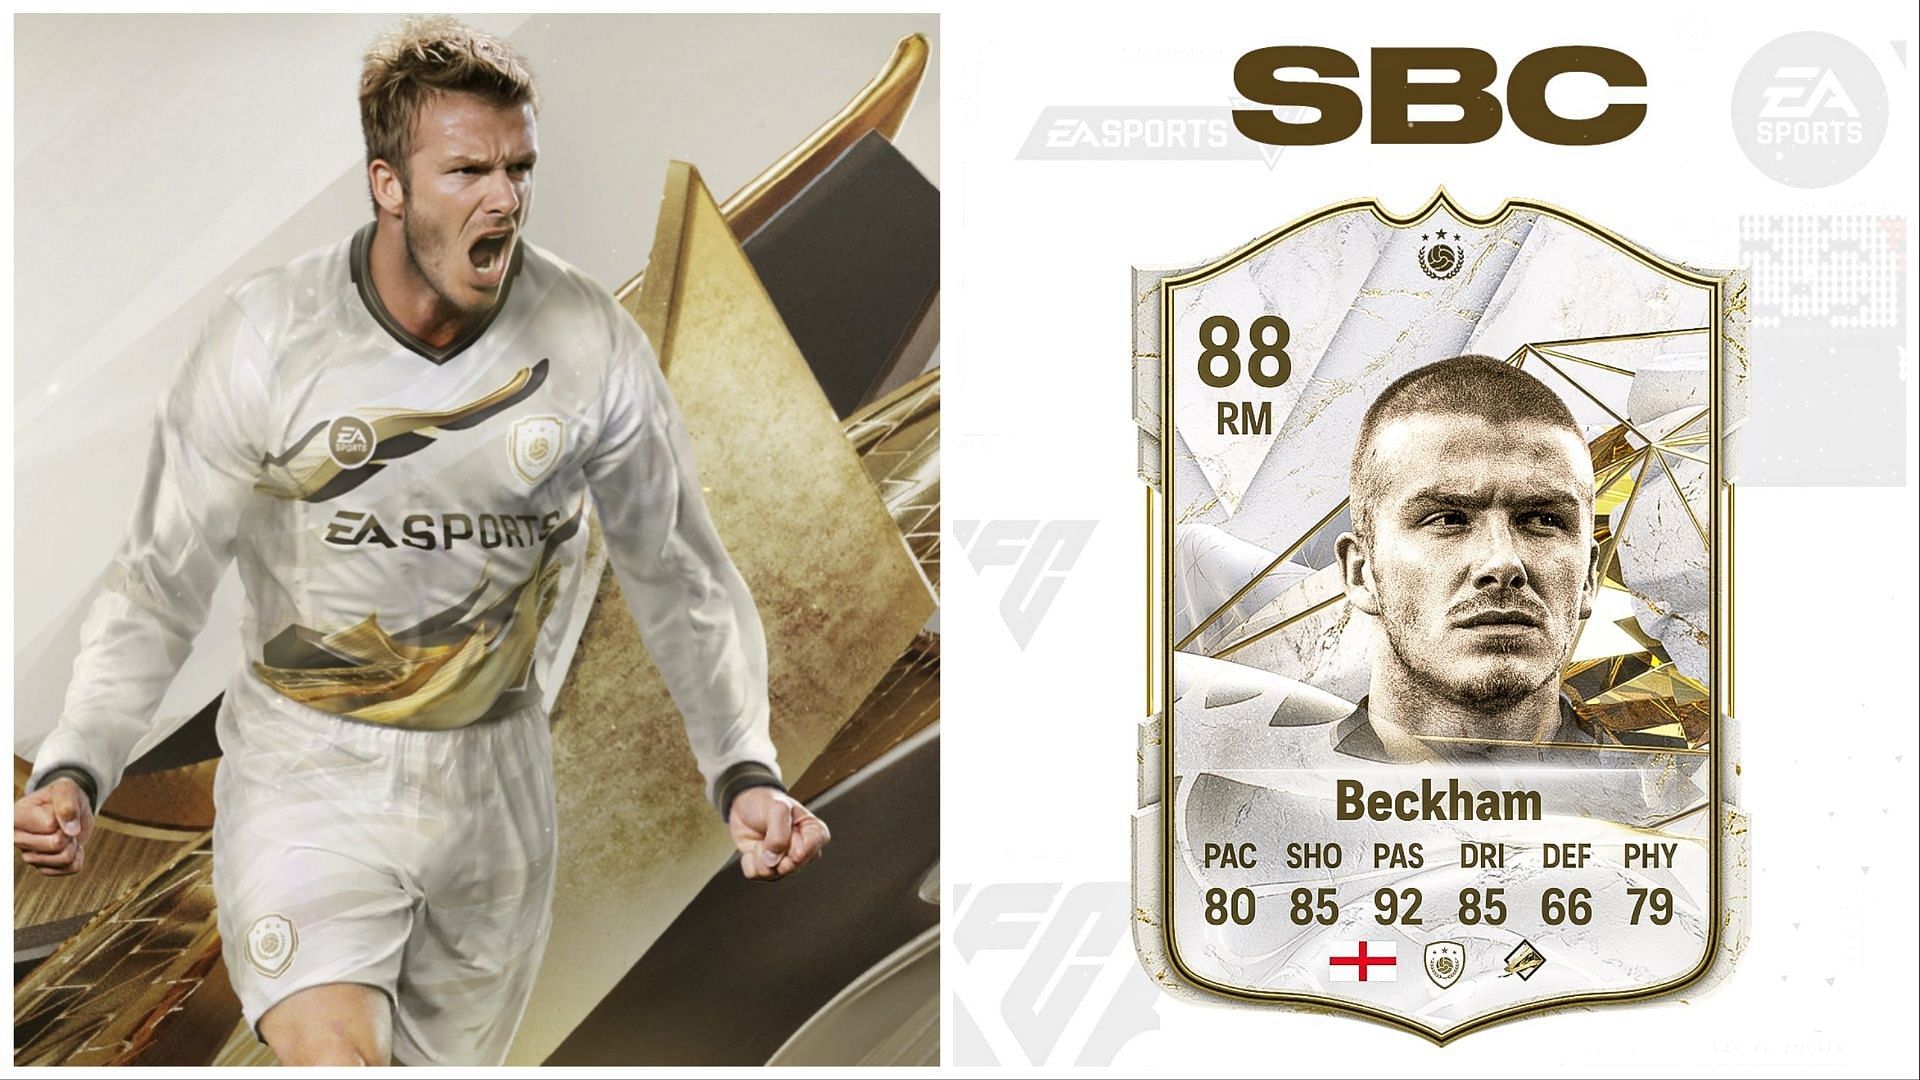 Beckham has been leaked as an SBC (Images via EA Sports and Twitter/FUT Sheriff)